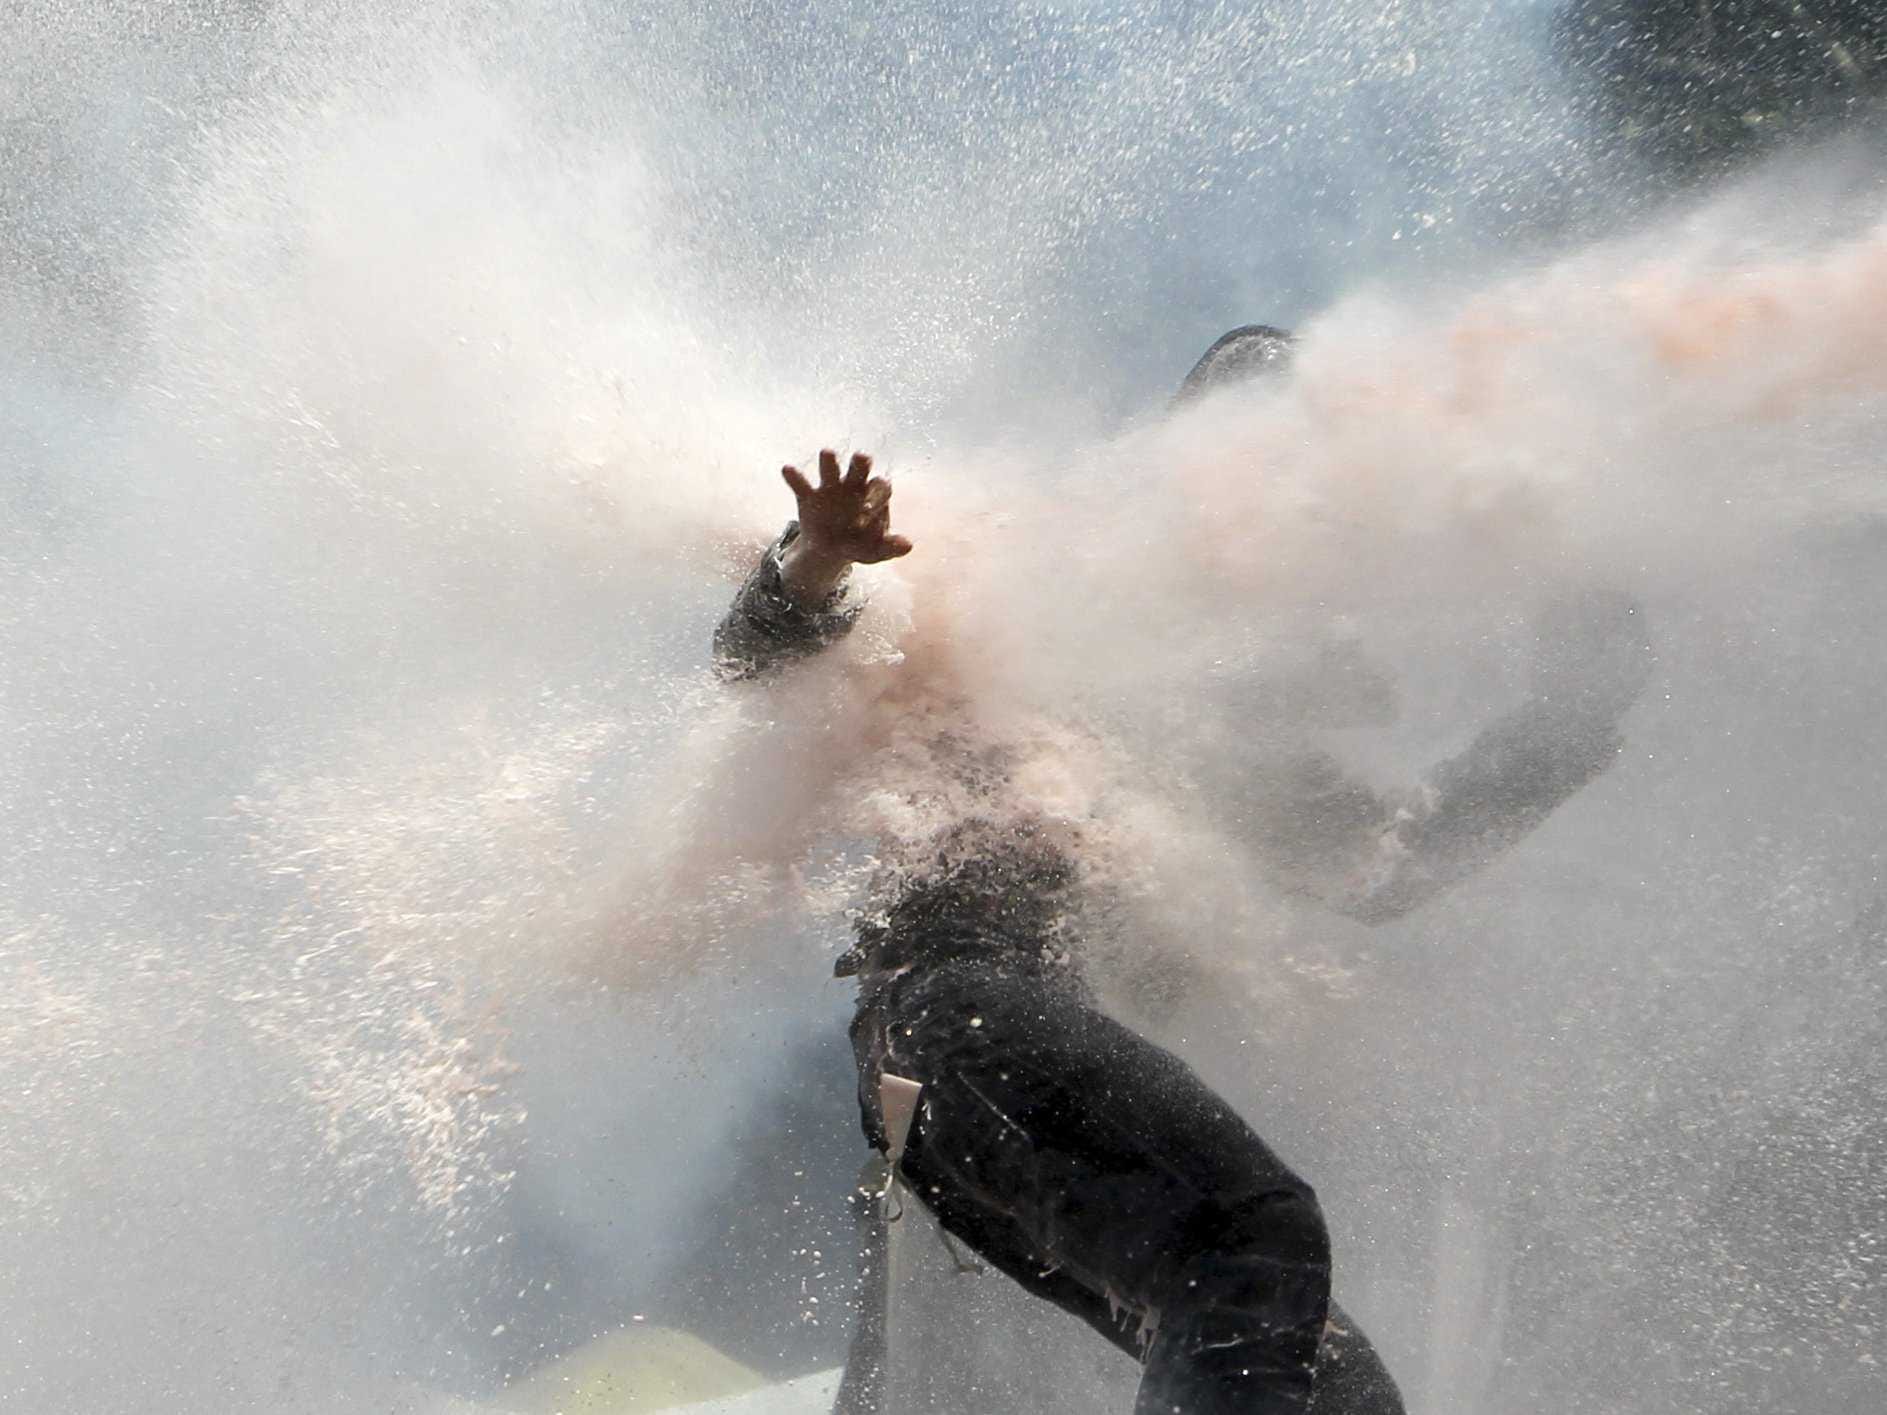 the-water-cannon-used-on-turkish-protesters-looks-painful-photos.jpg